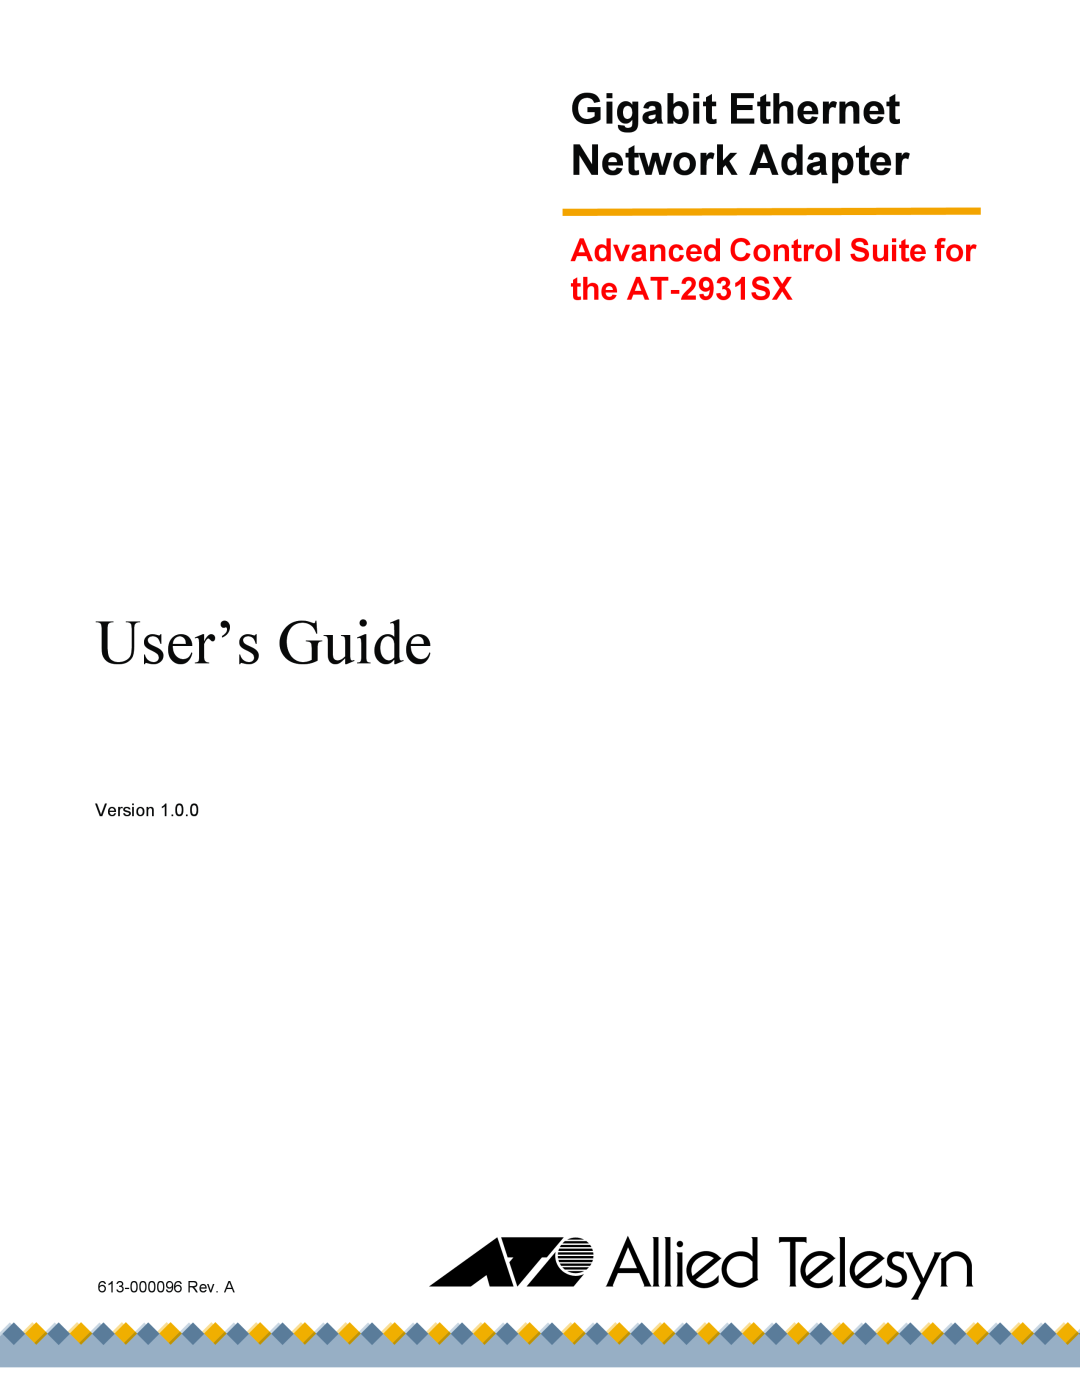 Allied Telesis manual User’s Guide, Gigabit Ethernet Network Adapter, Advanced Control Suite for the AT-2931SX, Version 